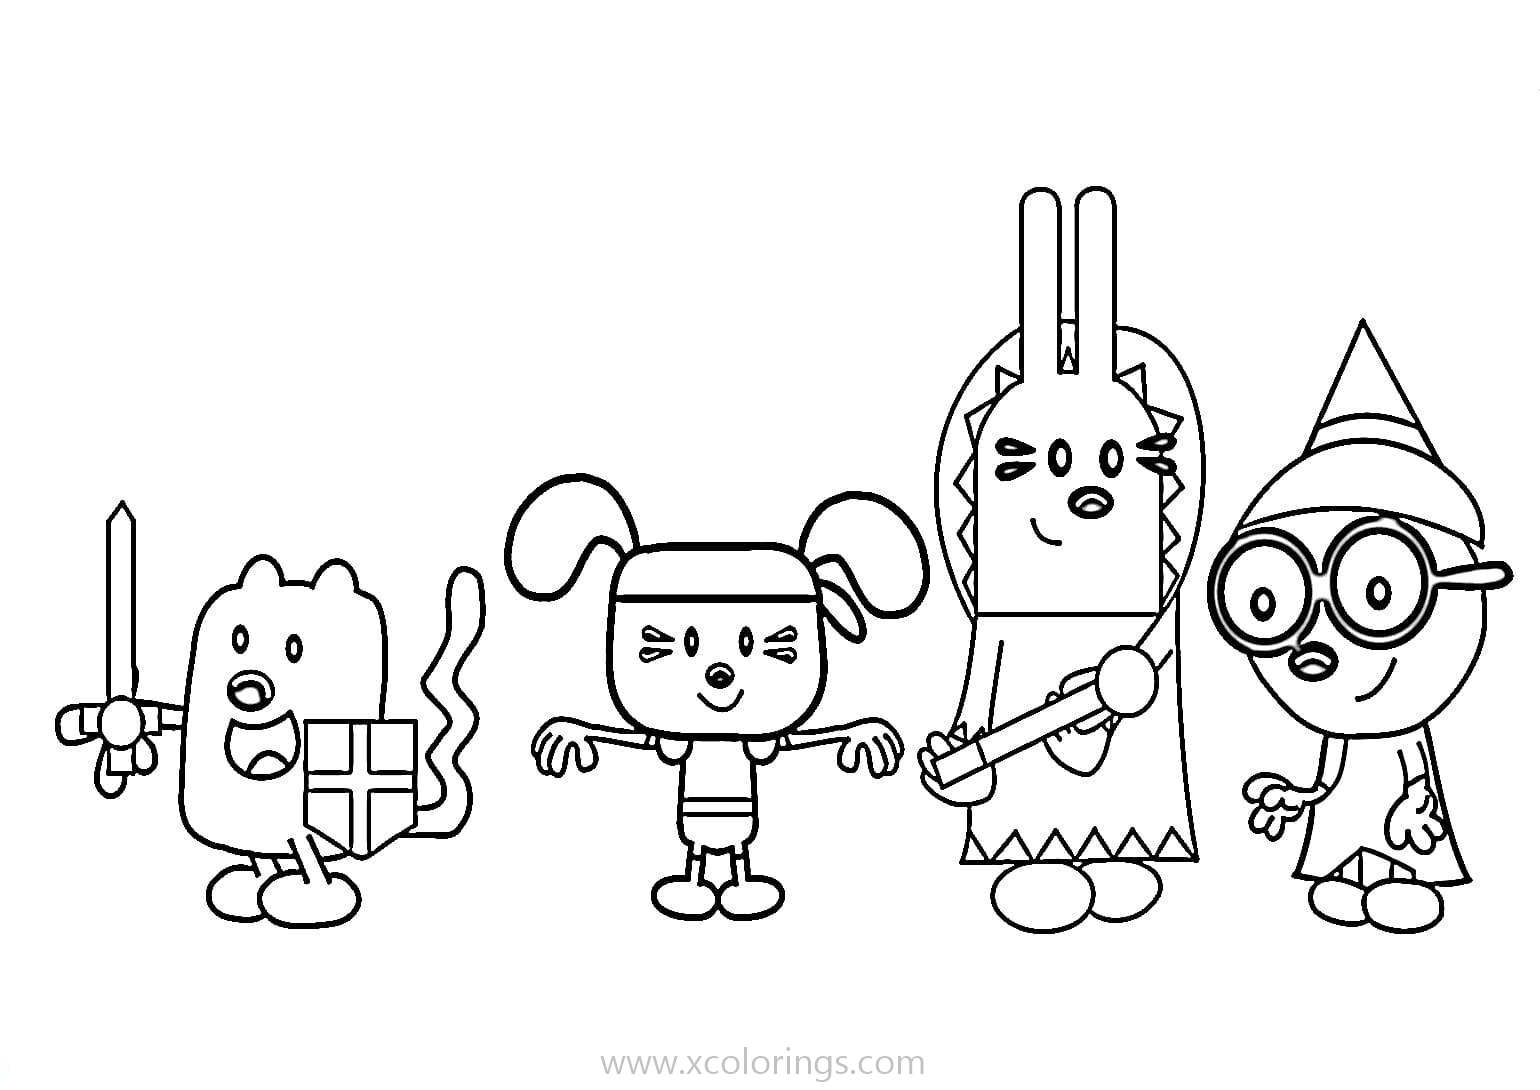 Free Wow Wow Wubbzy Coloring Pages Masquerade printable